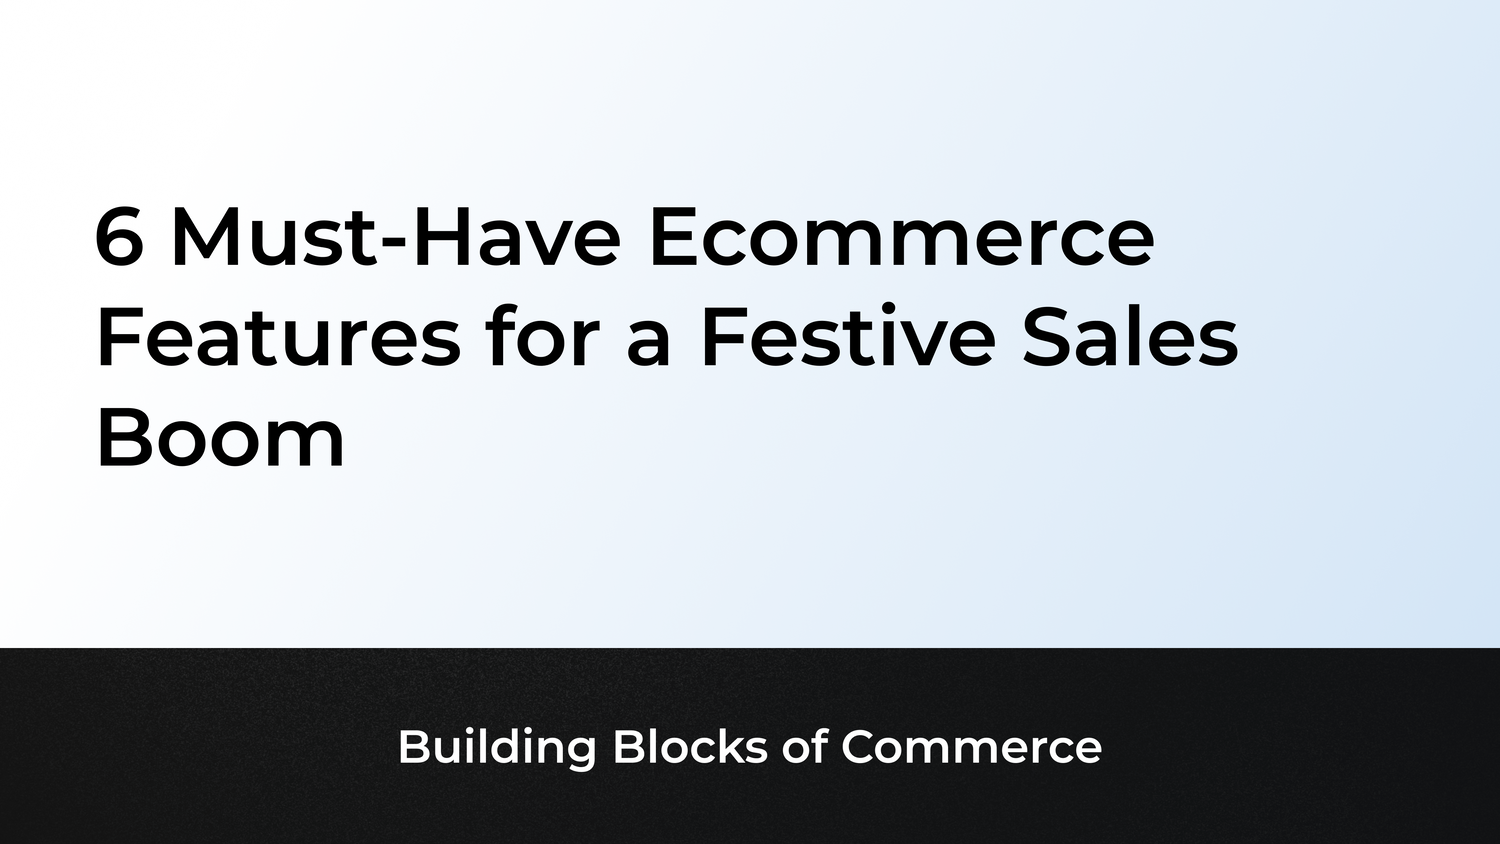 6 Must-Have Ecommerce Features for a Festive Sales Boom